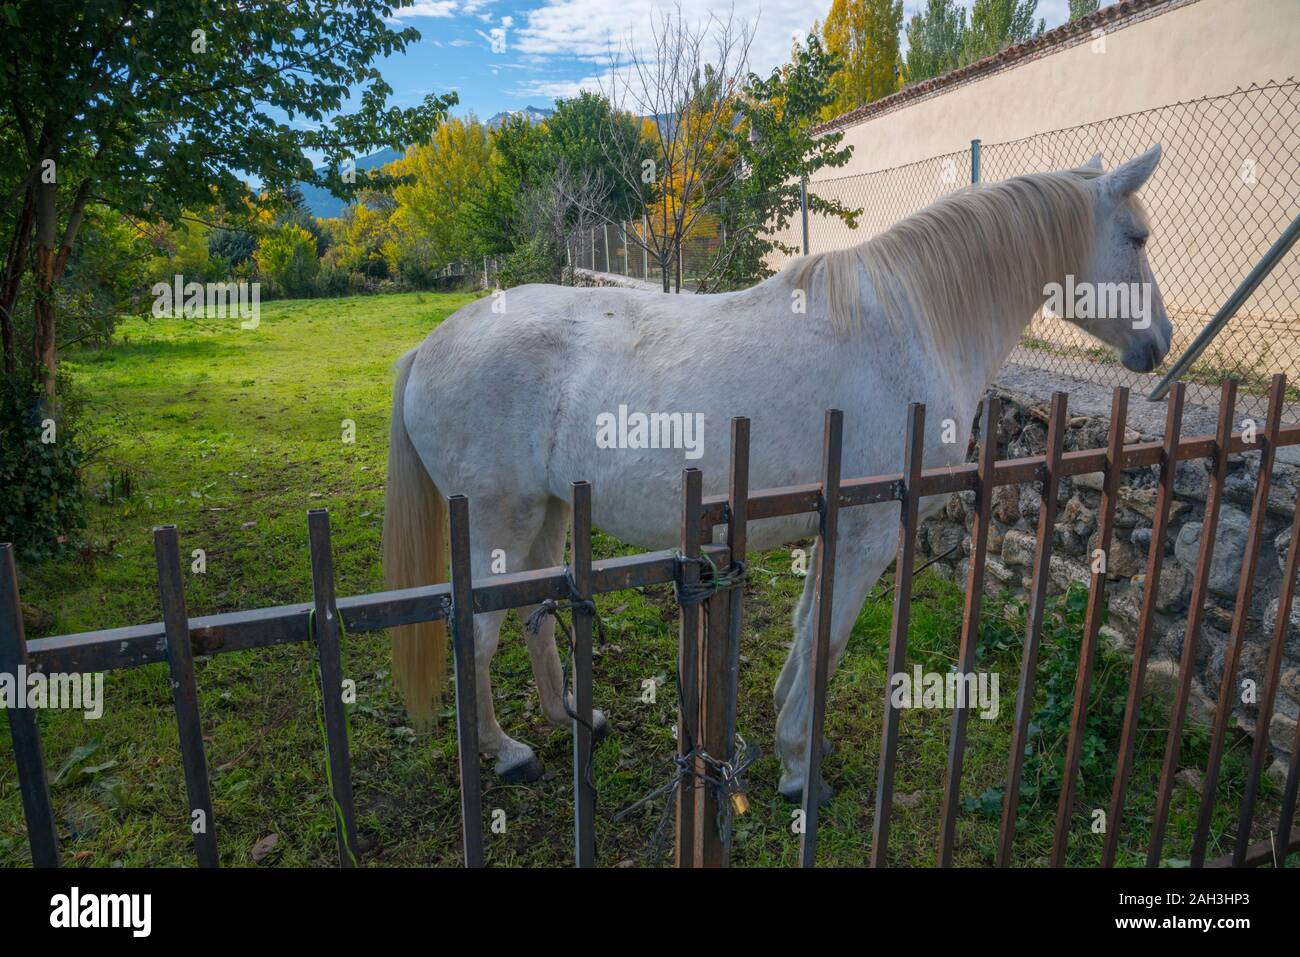 White horse in a meadow. Rascafria, Madrid province, Spain. Stock Photo